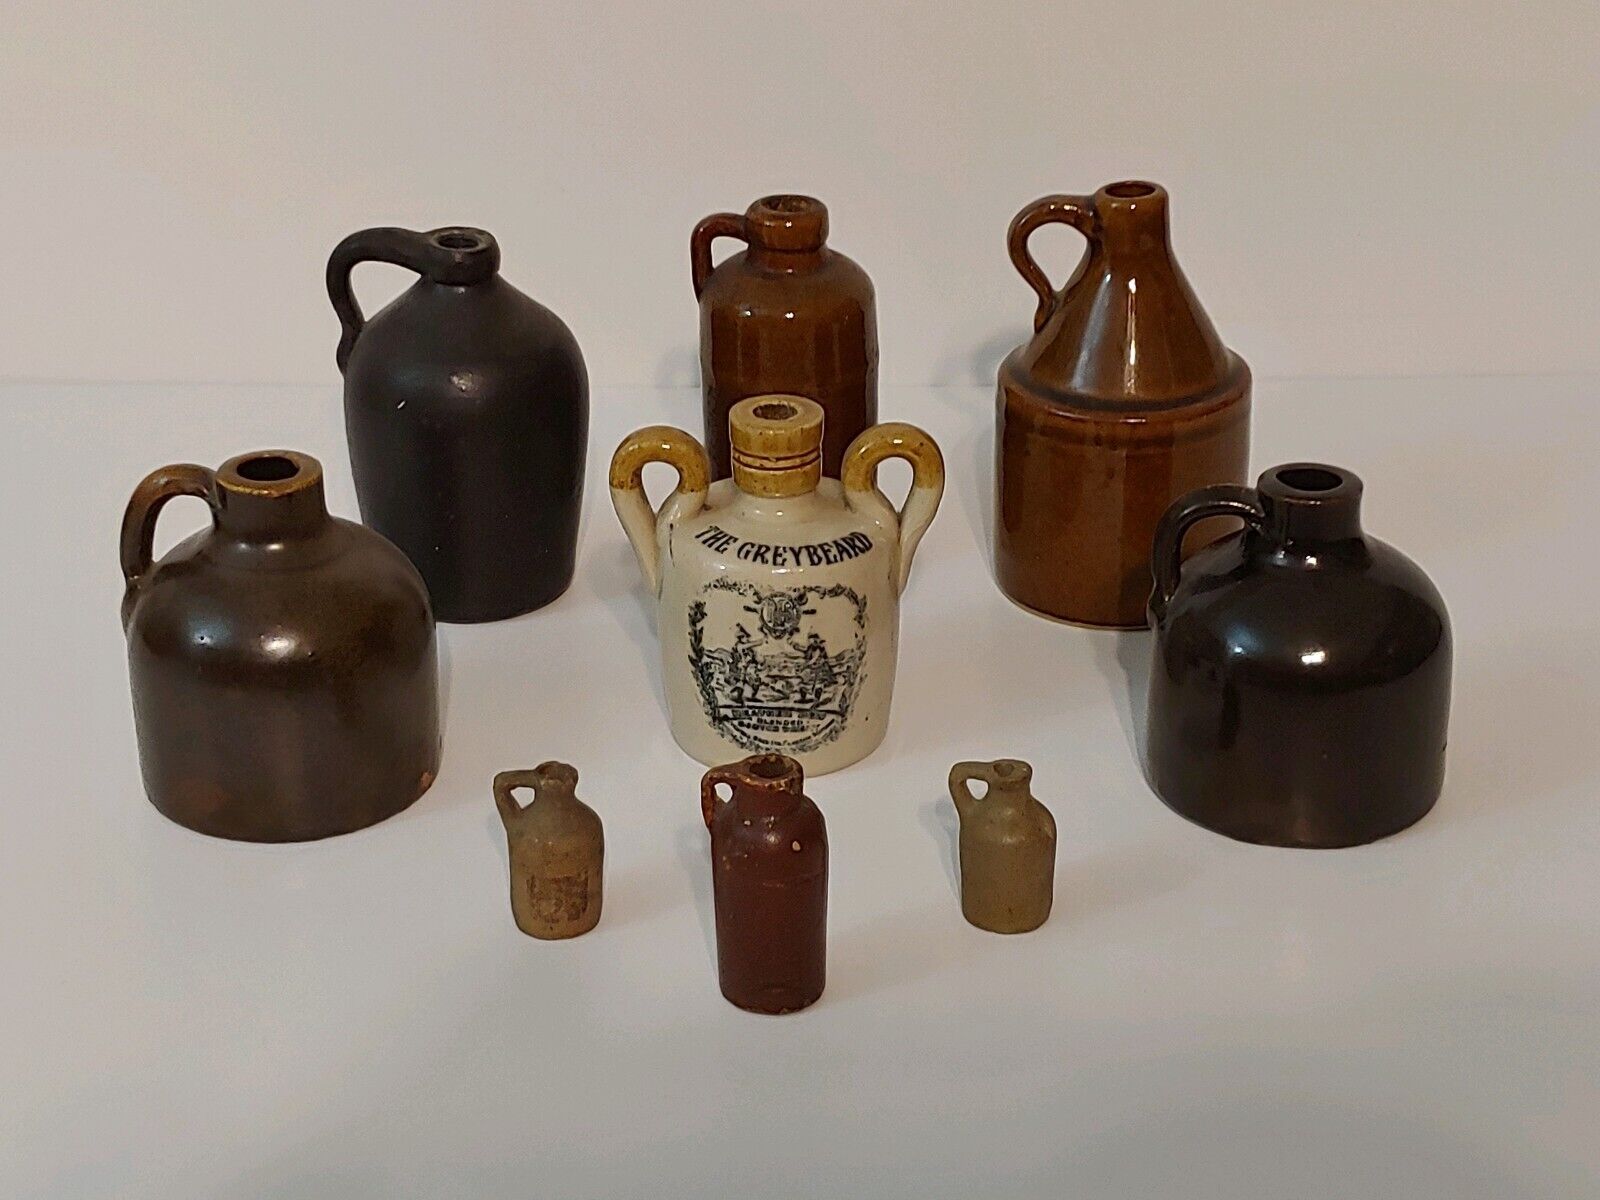 Lot of 9 Antique Small Stoneware Whiskey Rum Moonshine Jugs GREYBEARD + 2 MORE